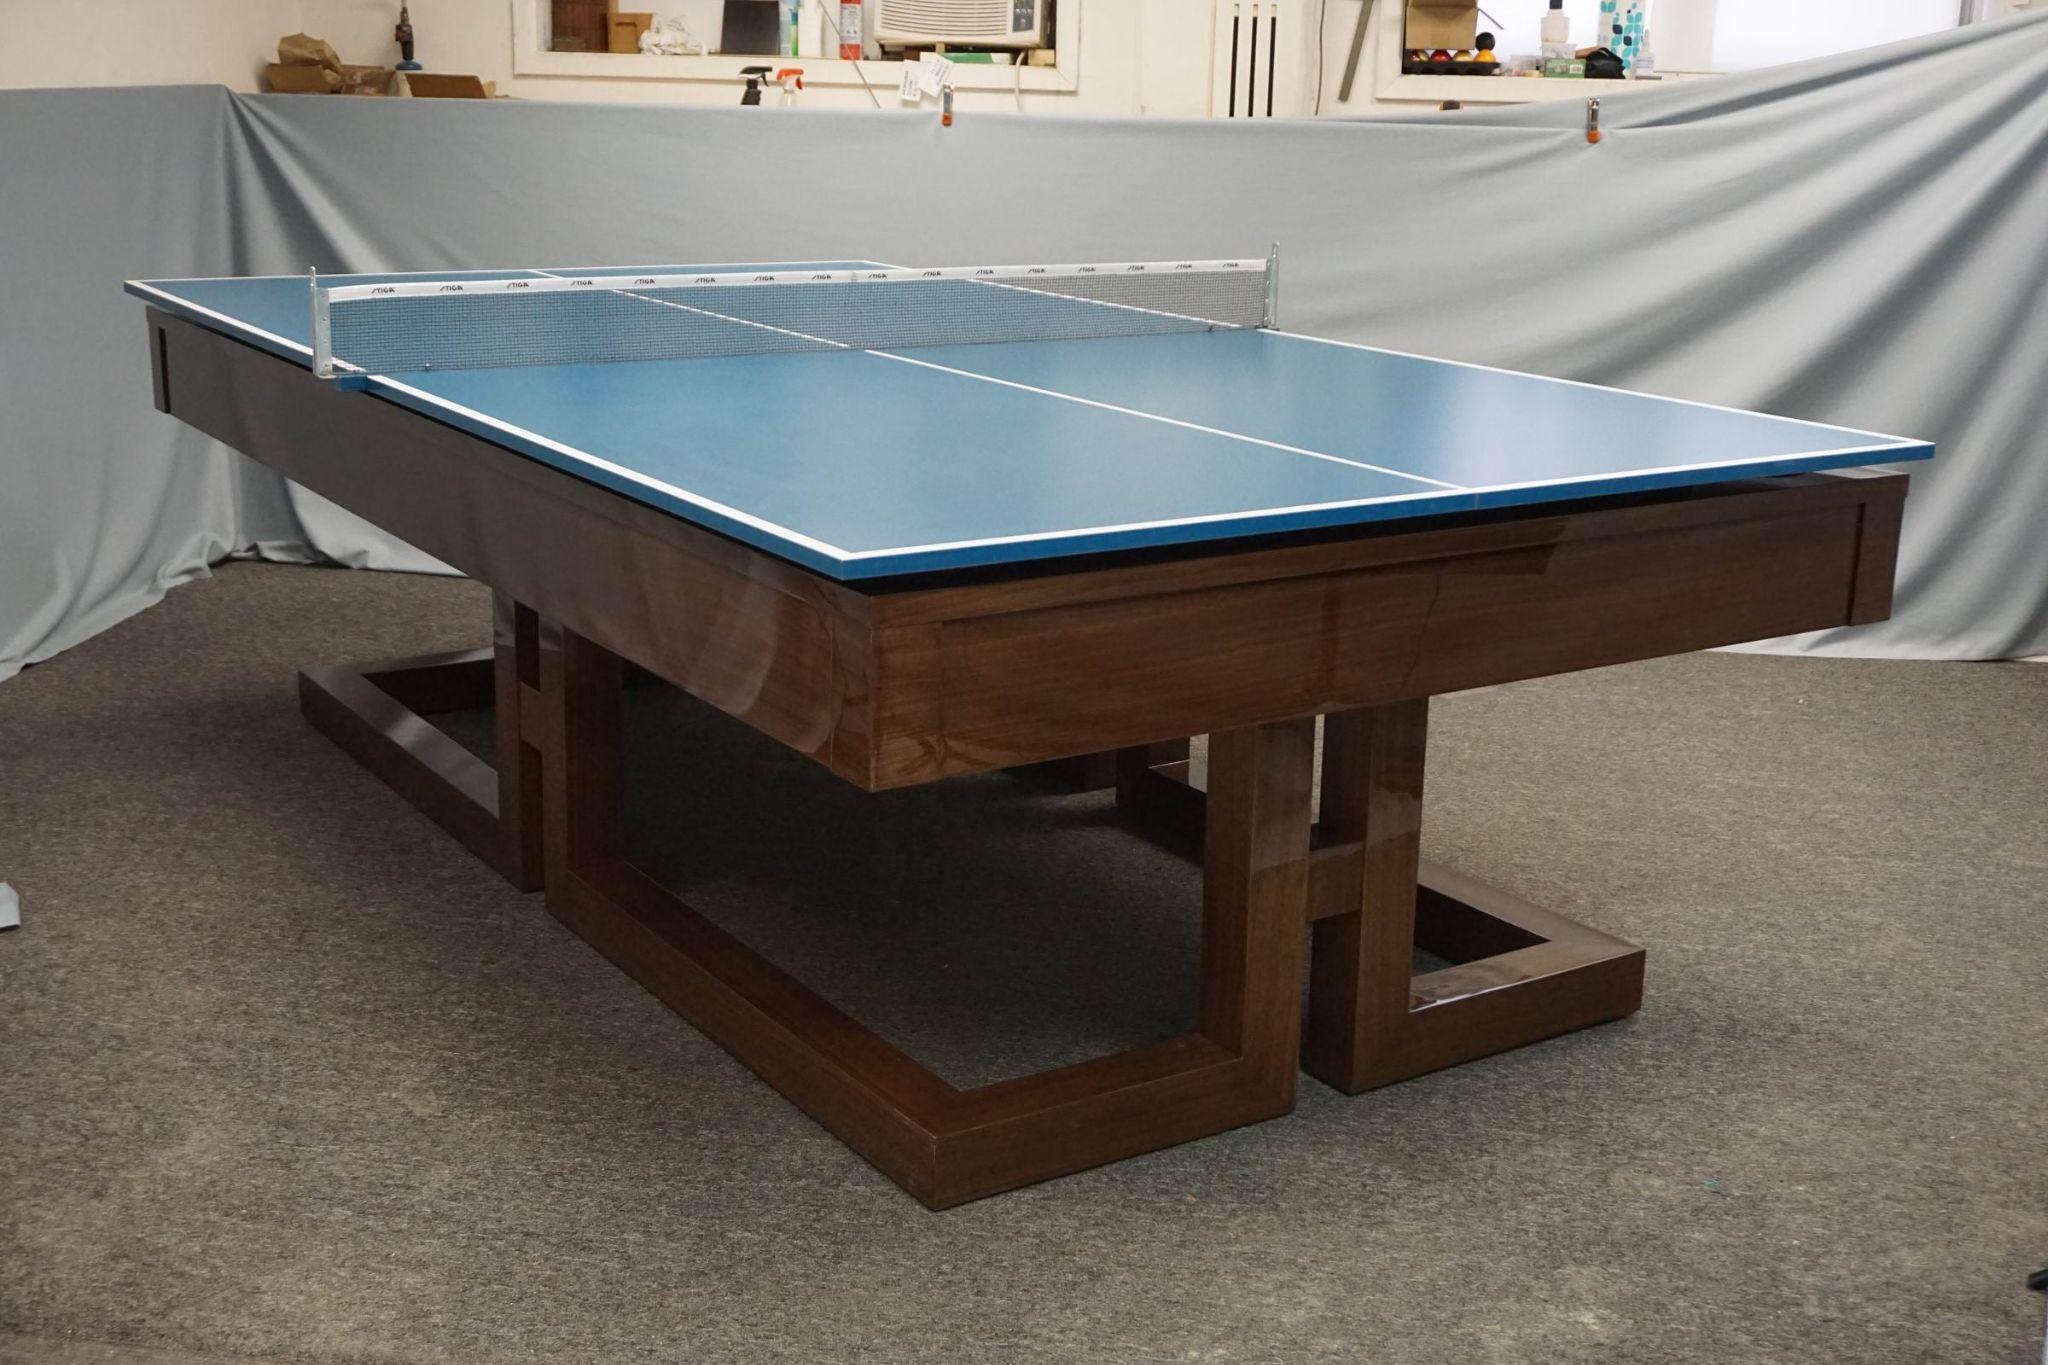 Table tennis conversion top pool table